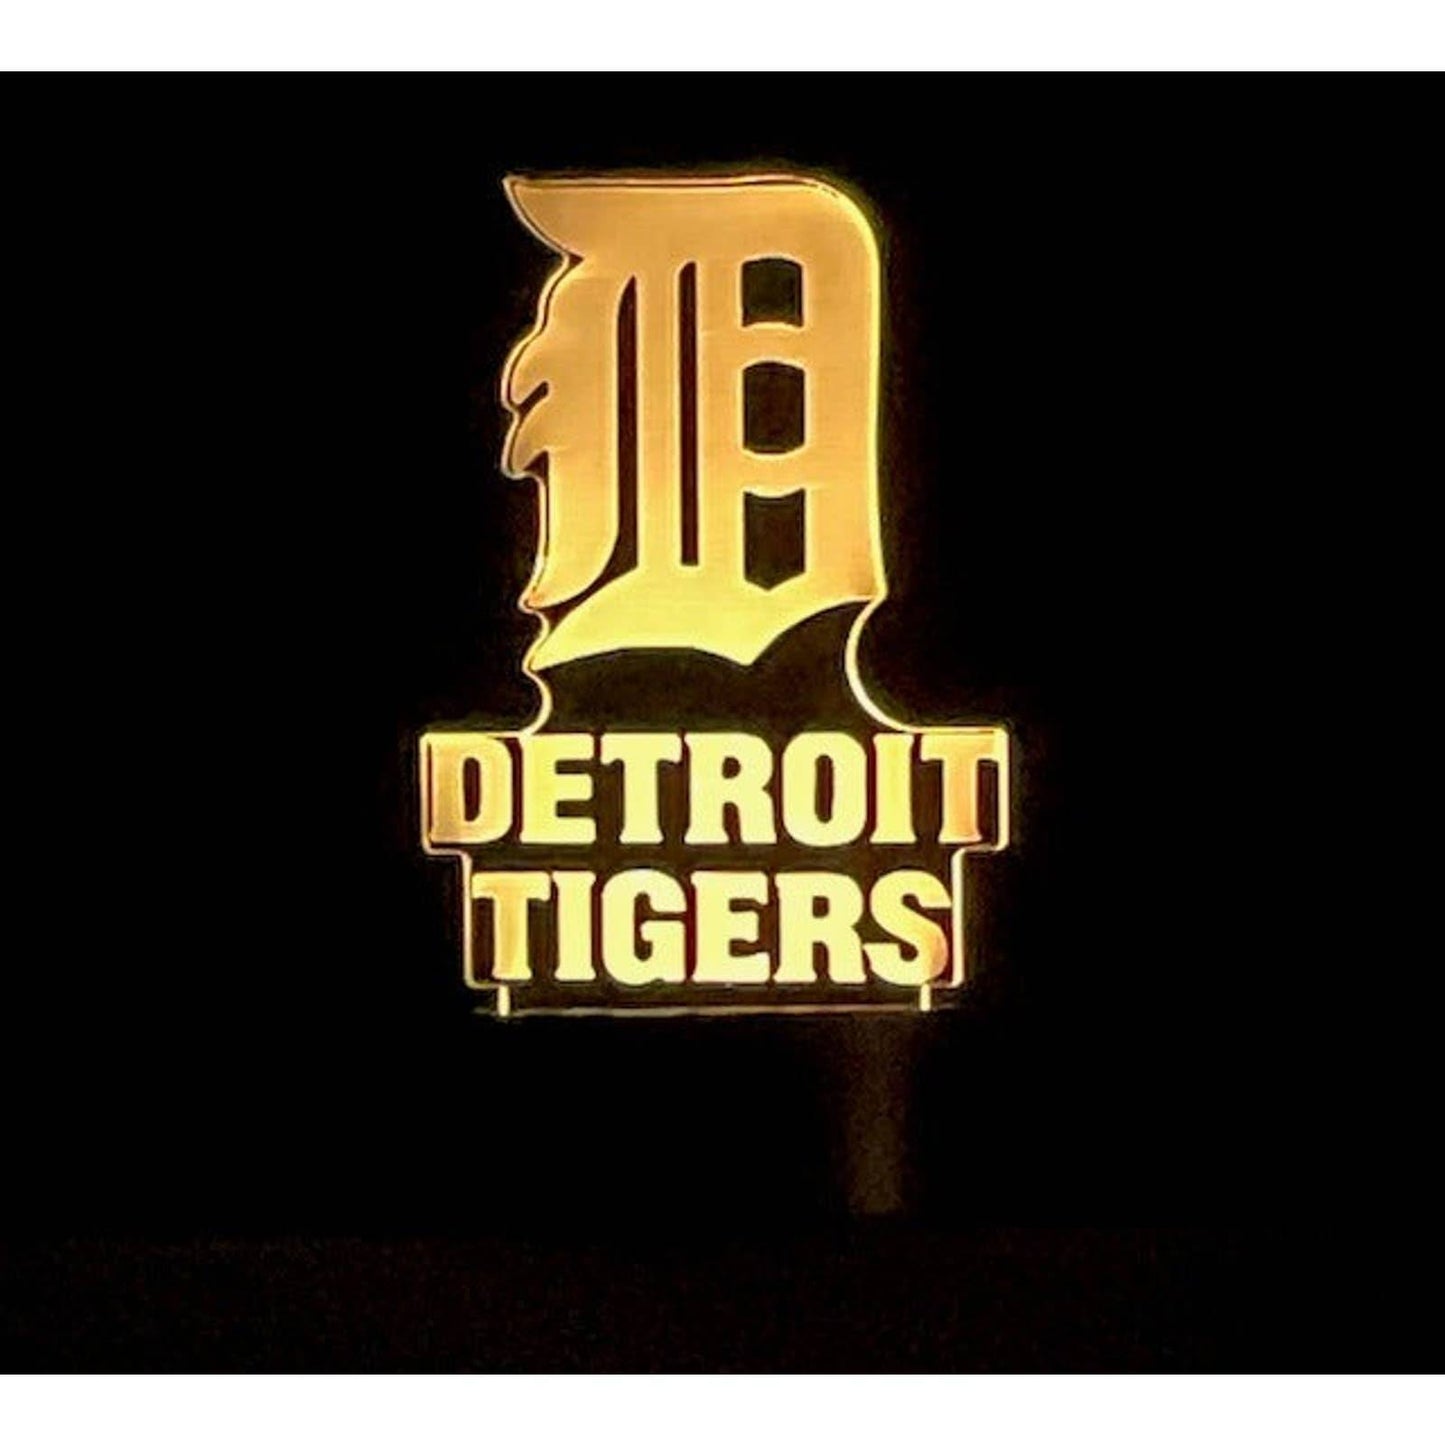 Detroit Tigers 3D LED Night-Light 7 Color Changing Lamp w/ Touch Switch